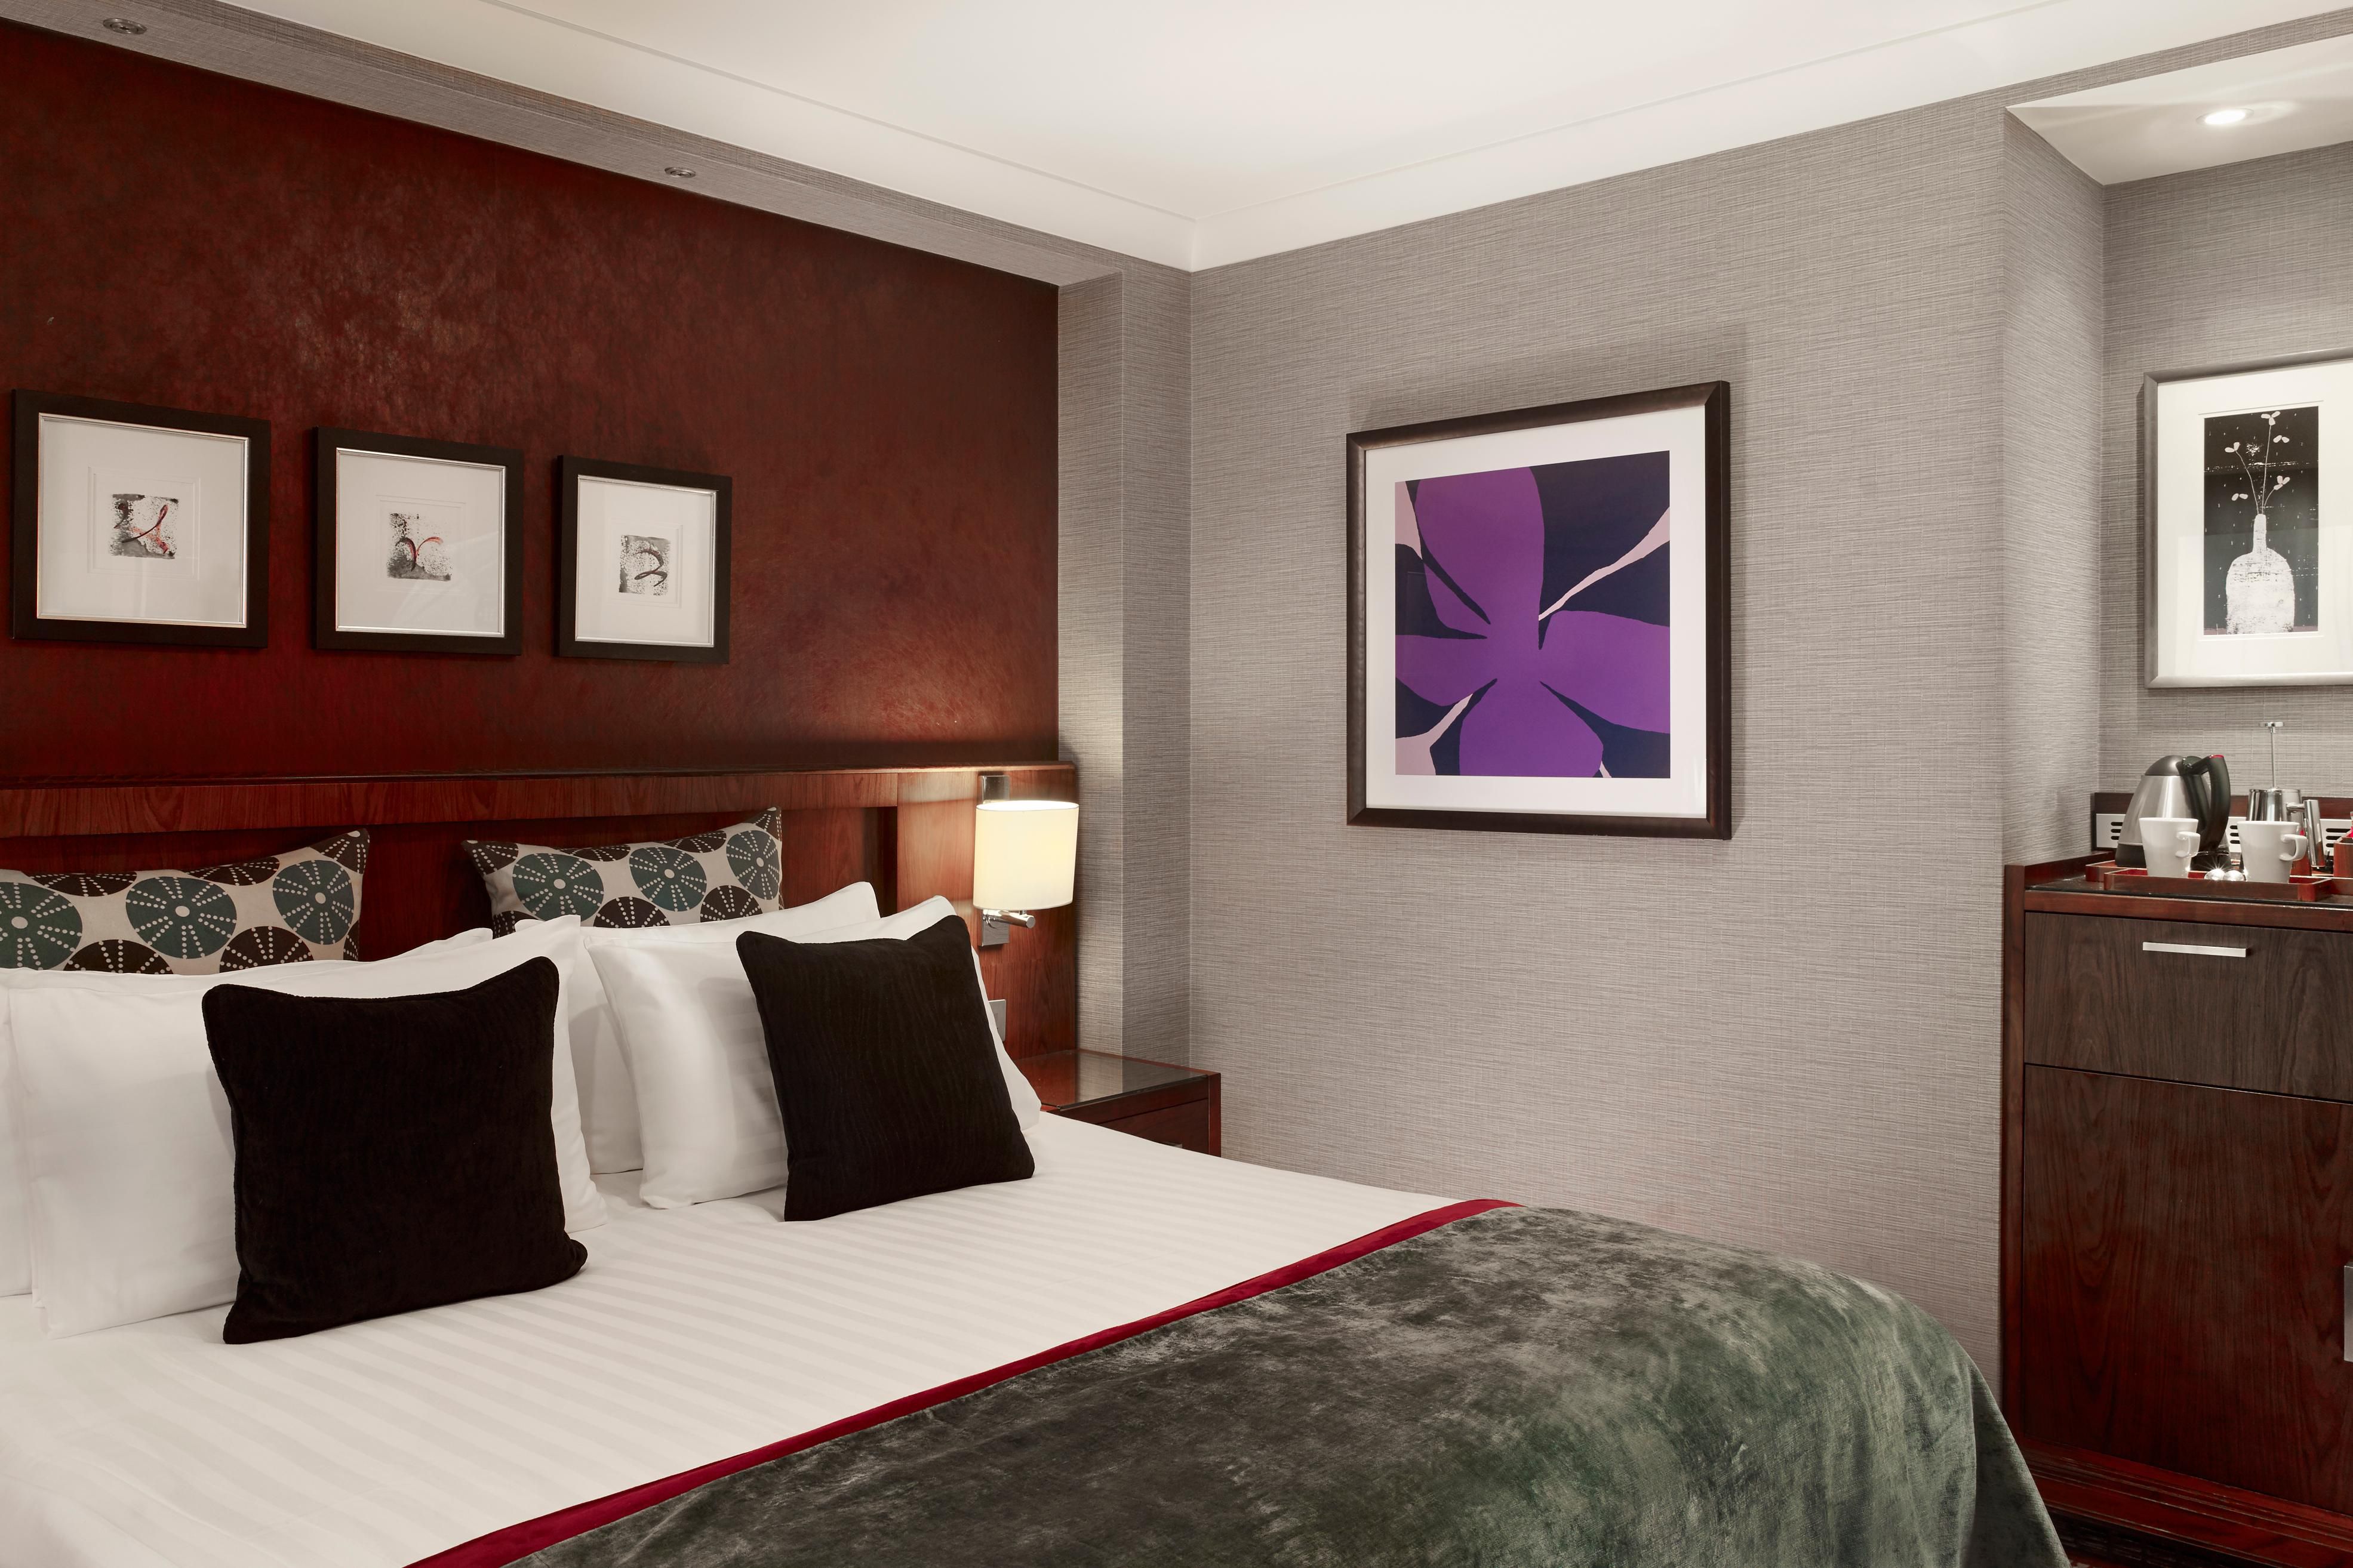 Relax and treat yourself to a Club Room. Bright, airy &amp; luxurious